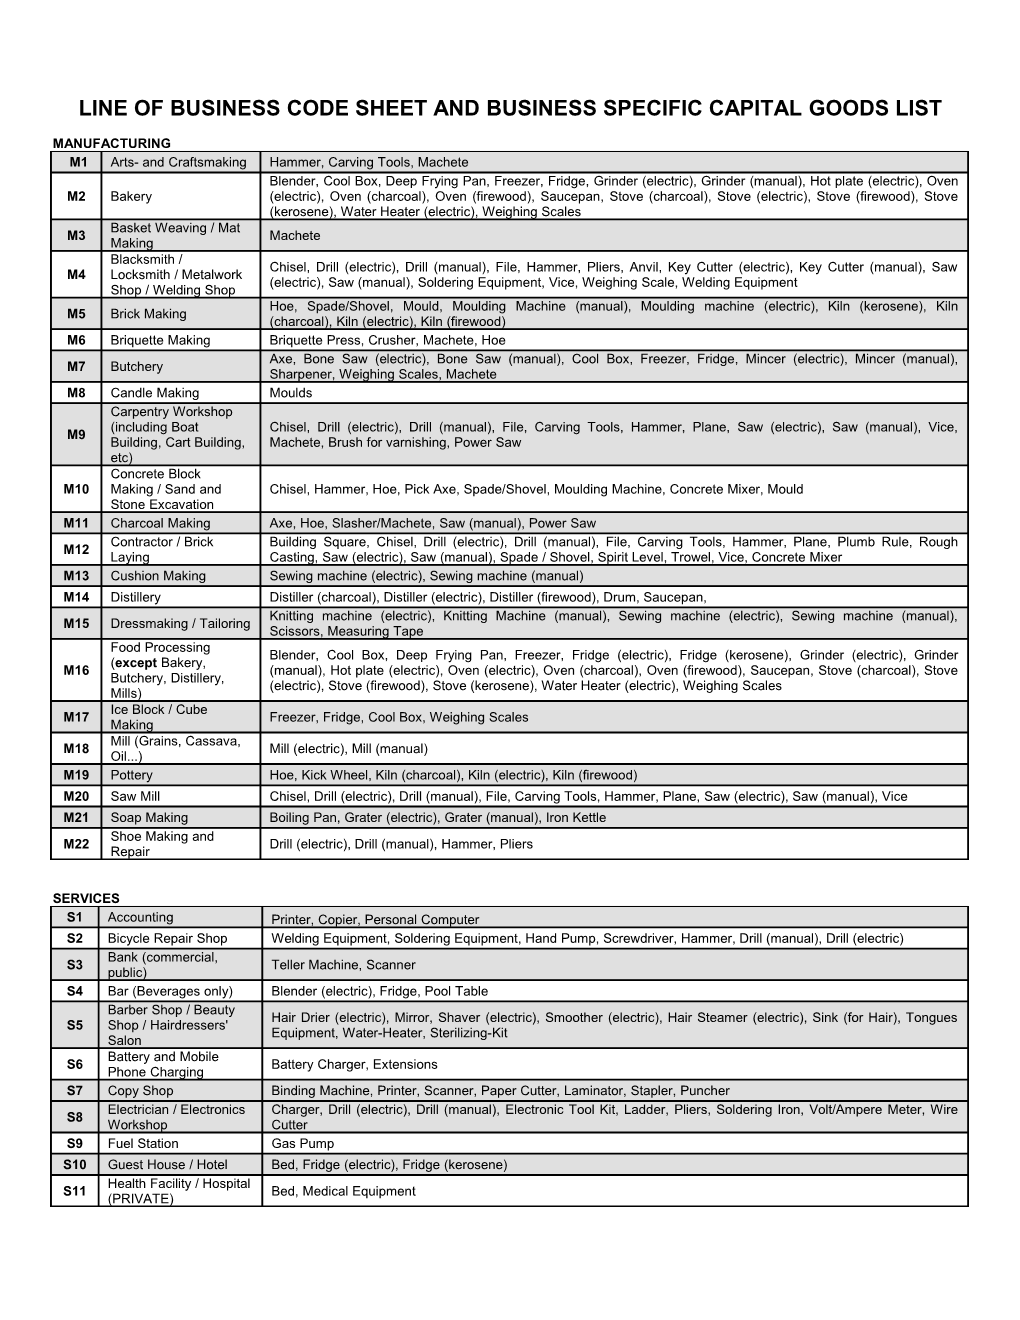 Line of Business Code Sheet and Business Specific Capital Goods List